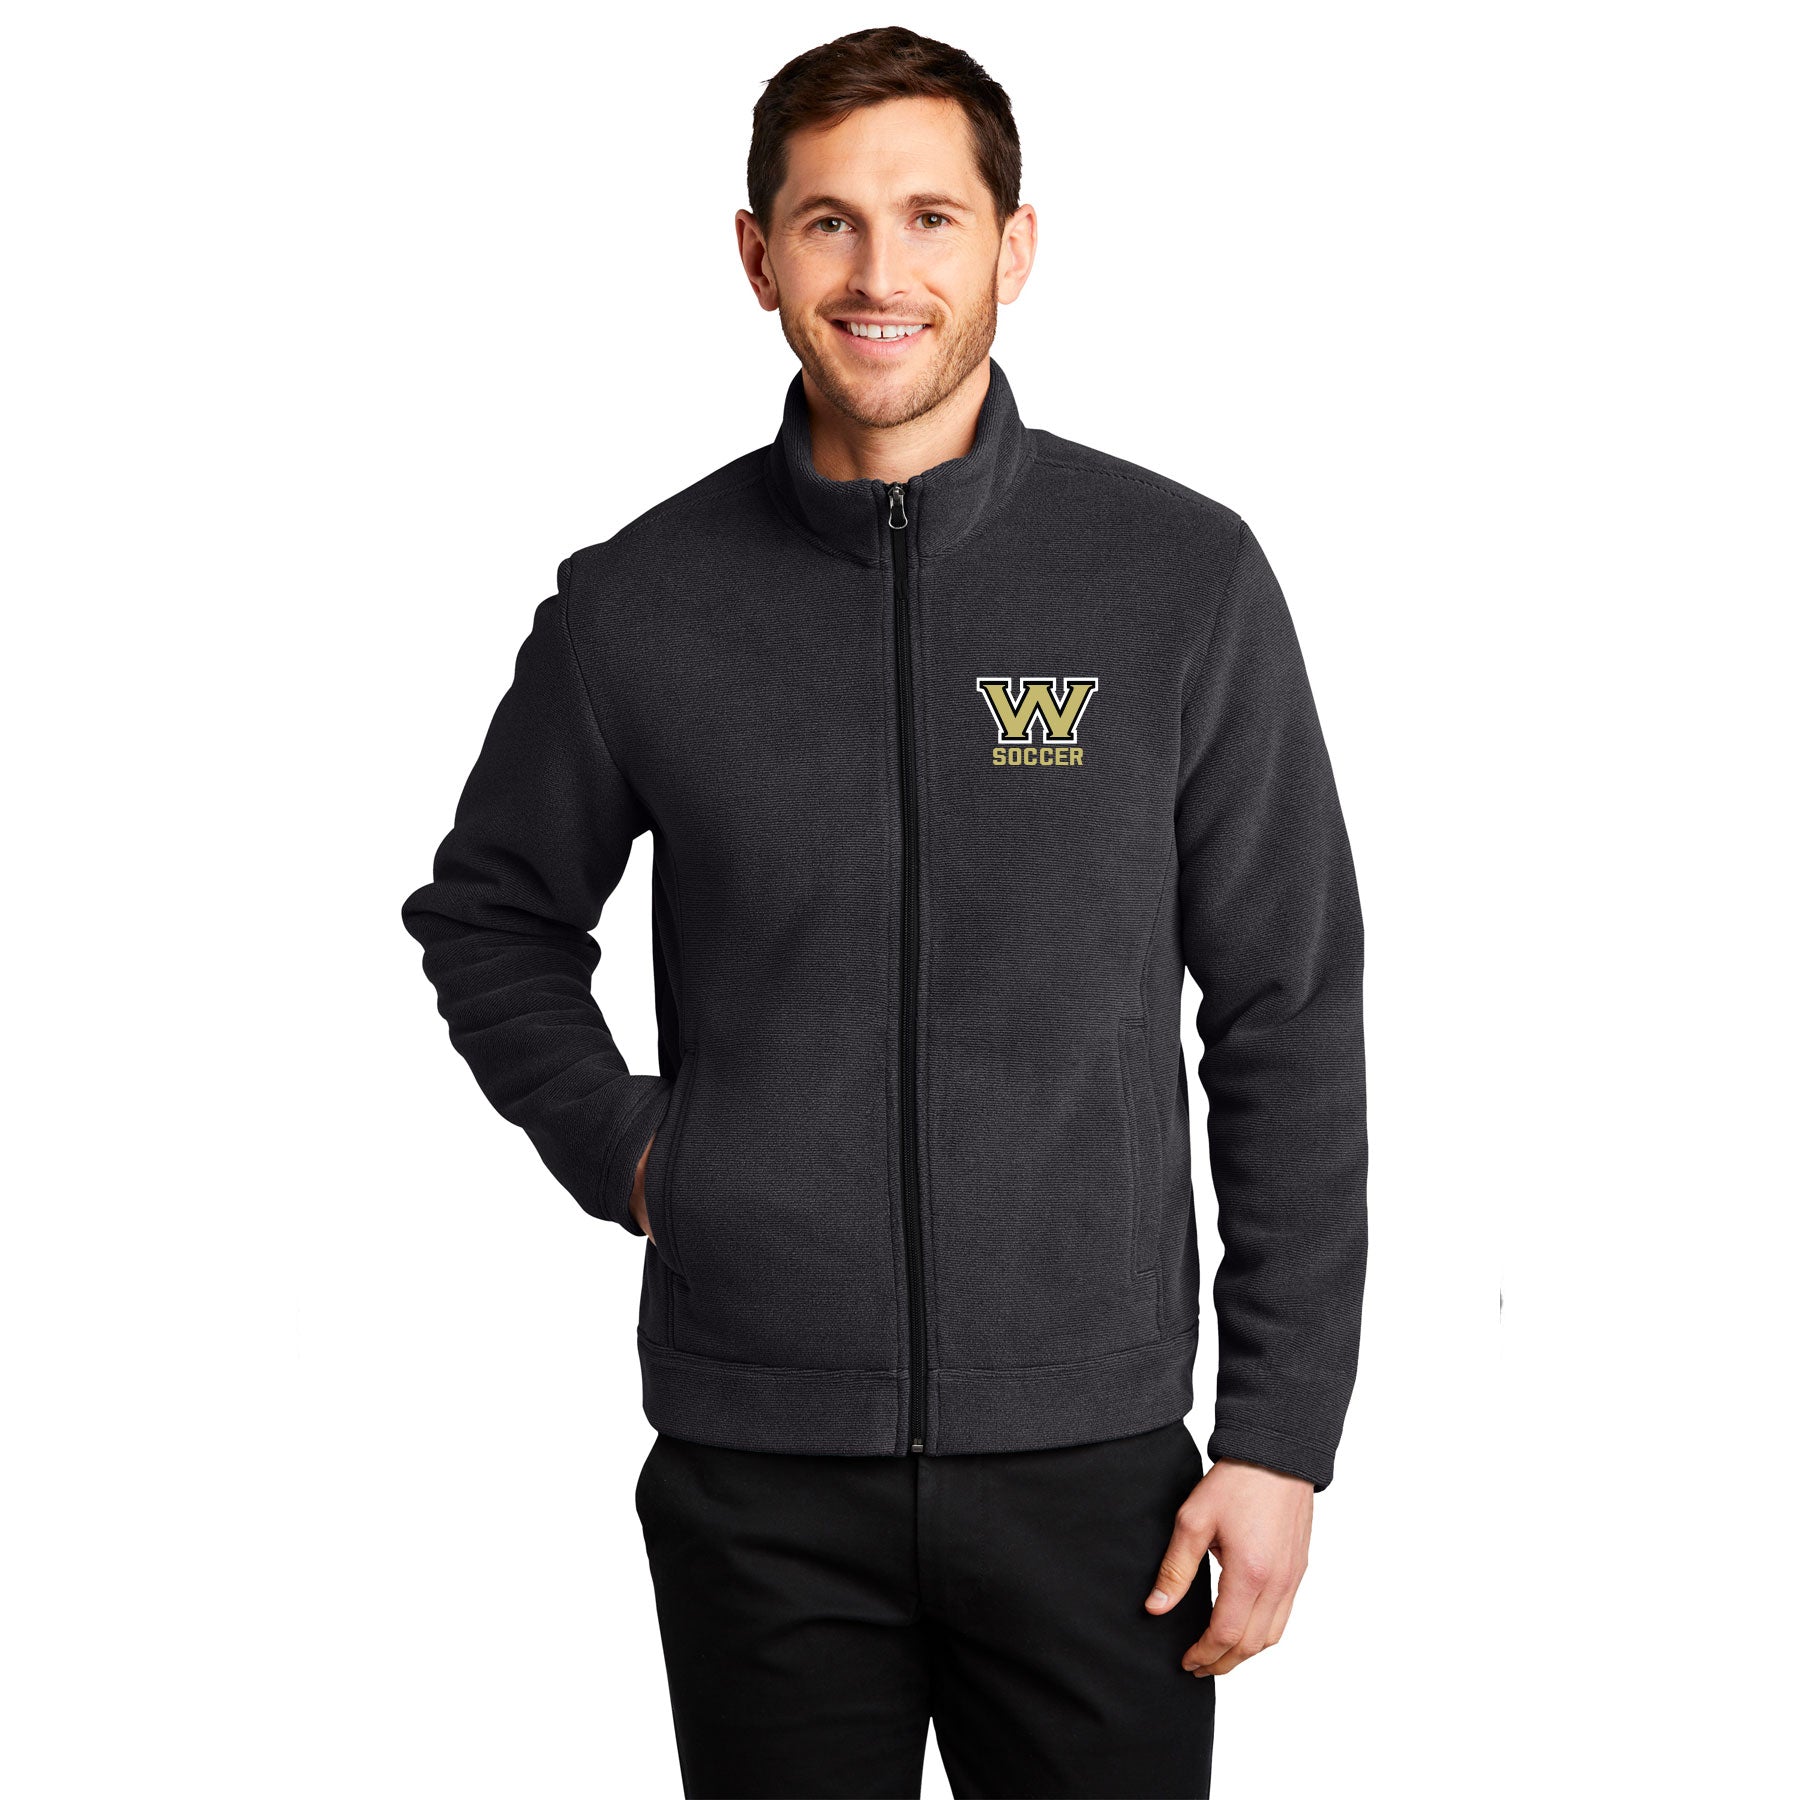 WESTVIEW SOCCER EMBROIDERED JACKET